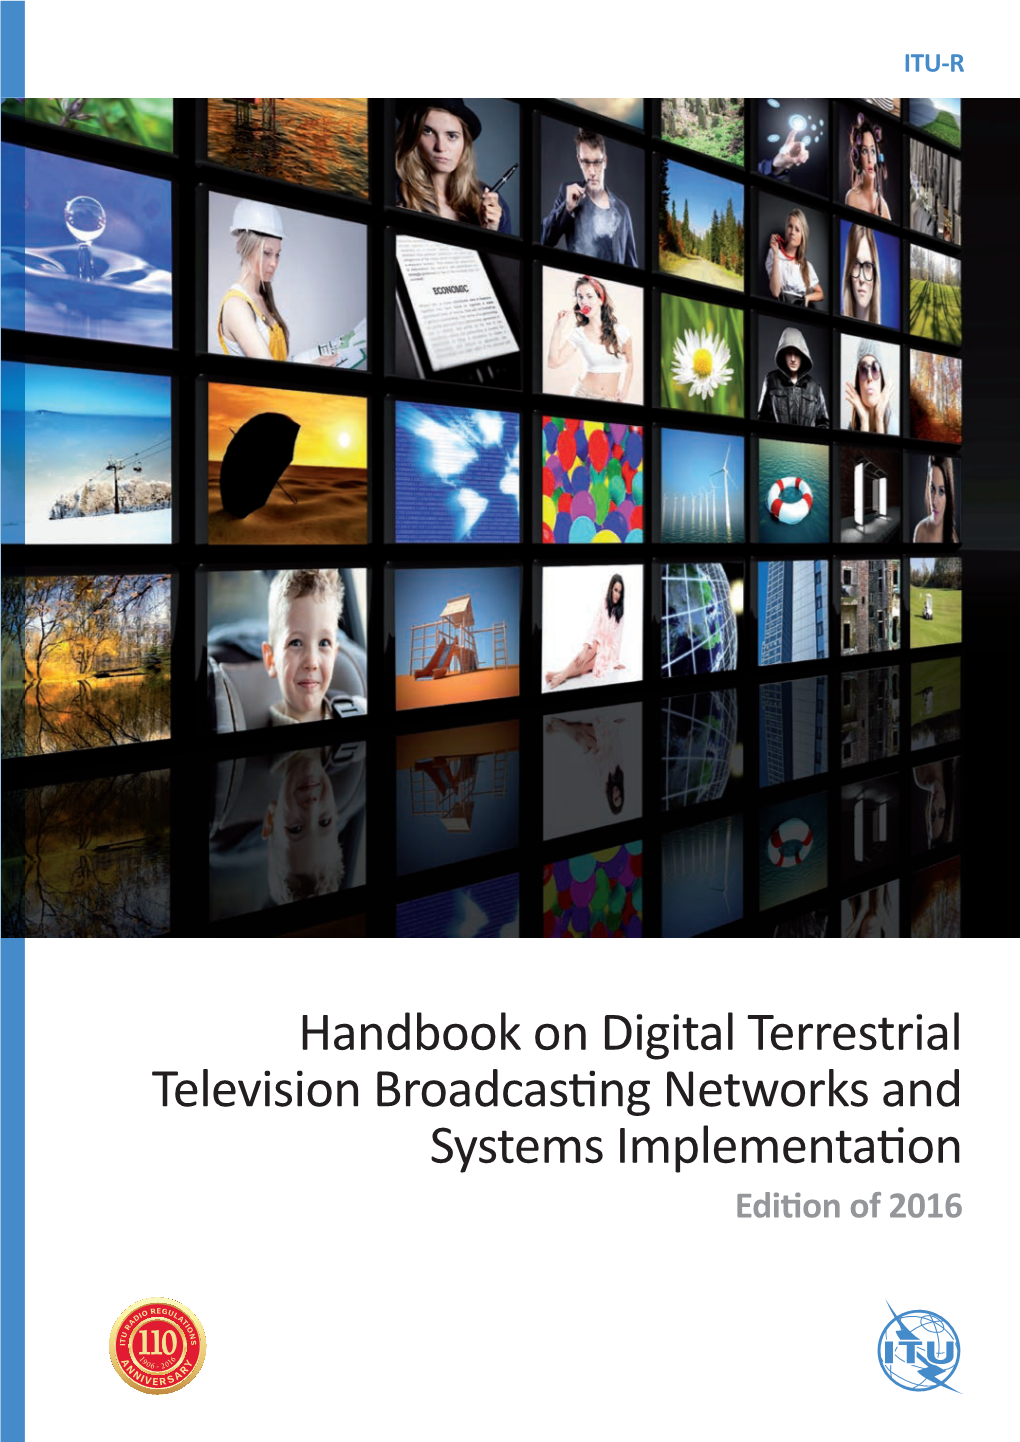 Handbook on Digital Terrestrial Television Broadcasting Networks and Systems Implementation